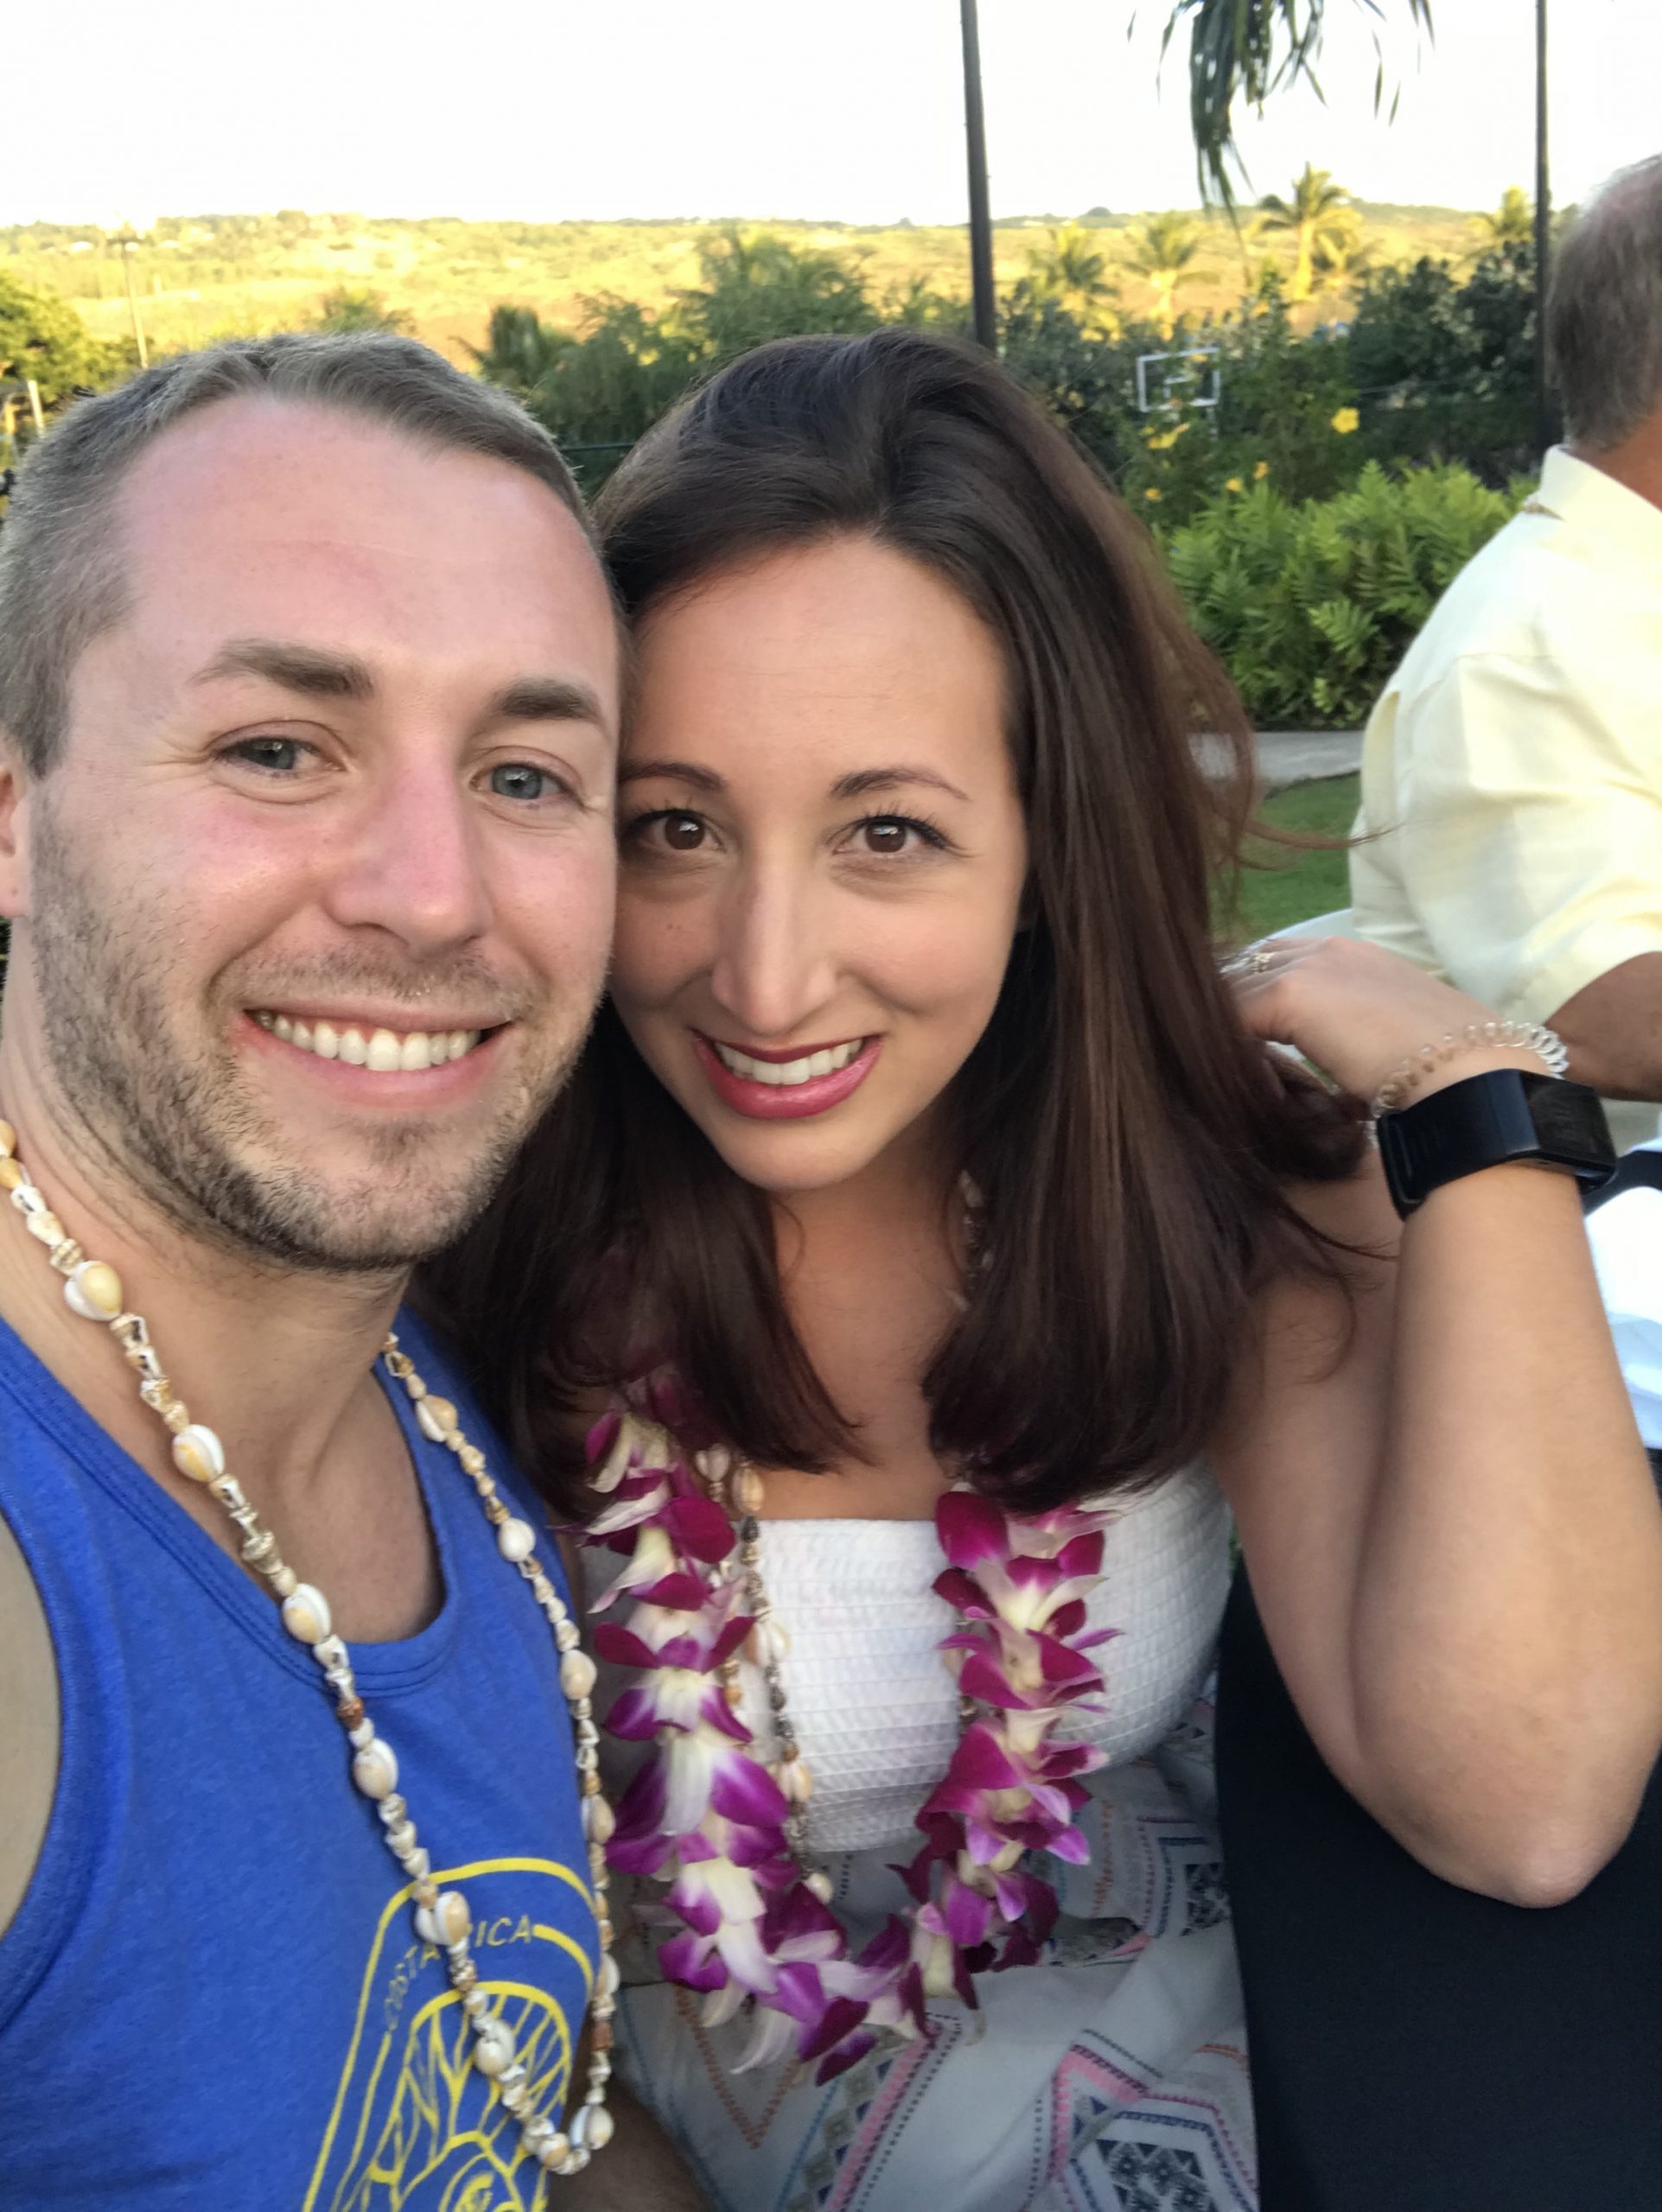 Boy and Girl smiling with Lei's on from Hawaii